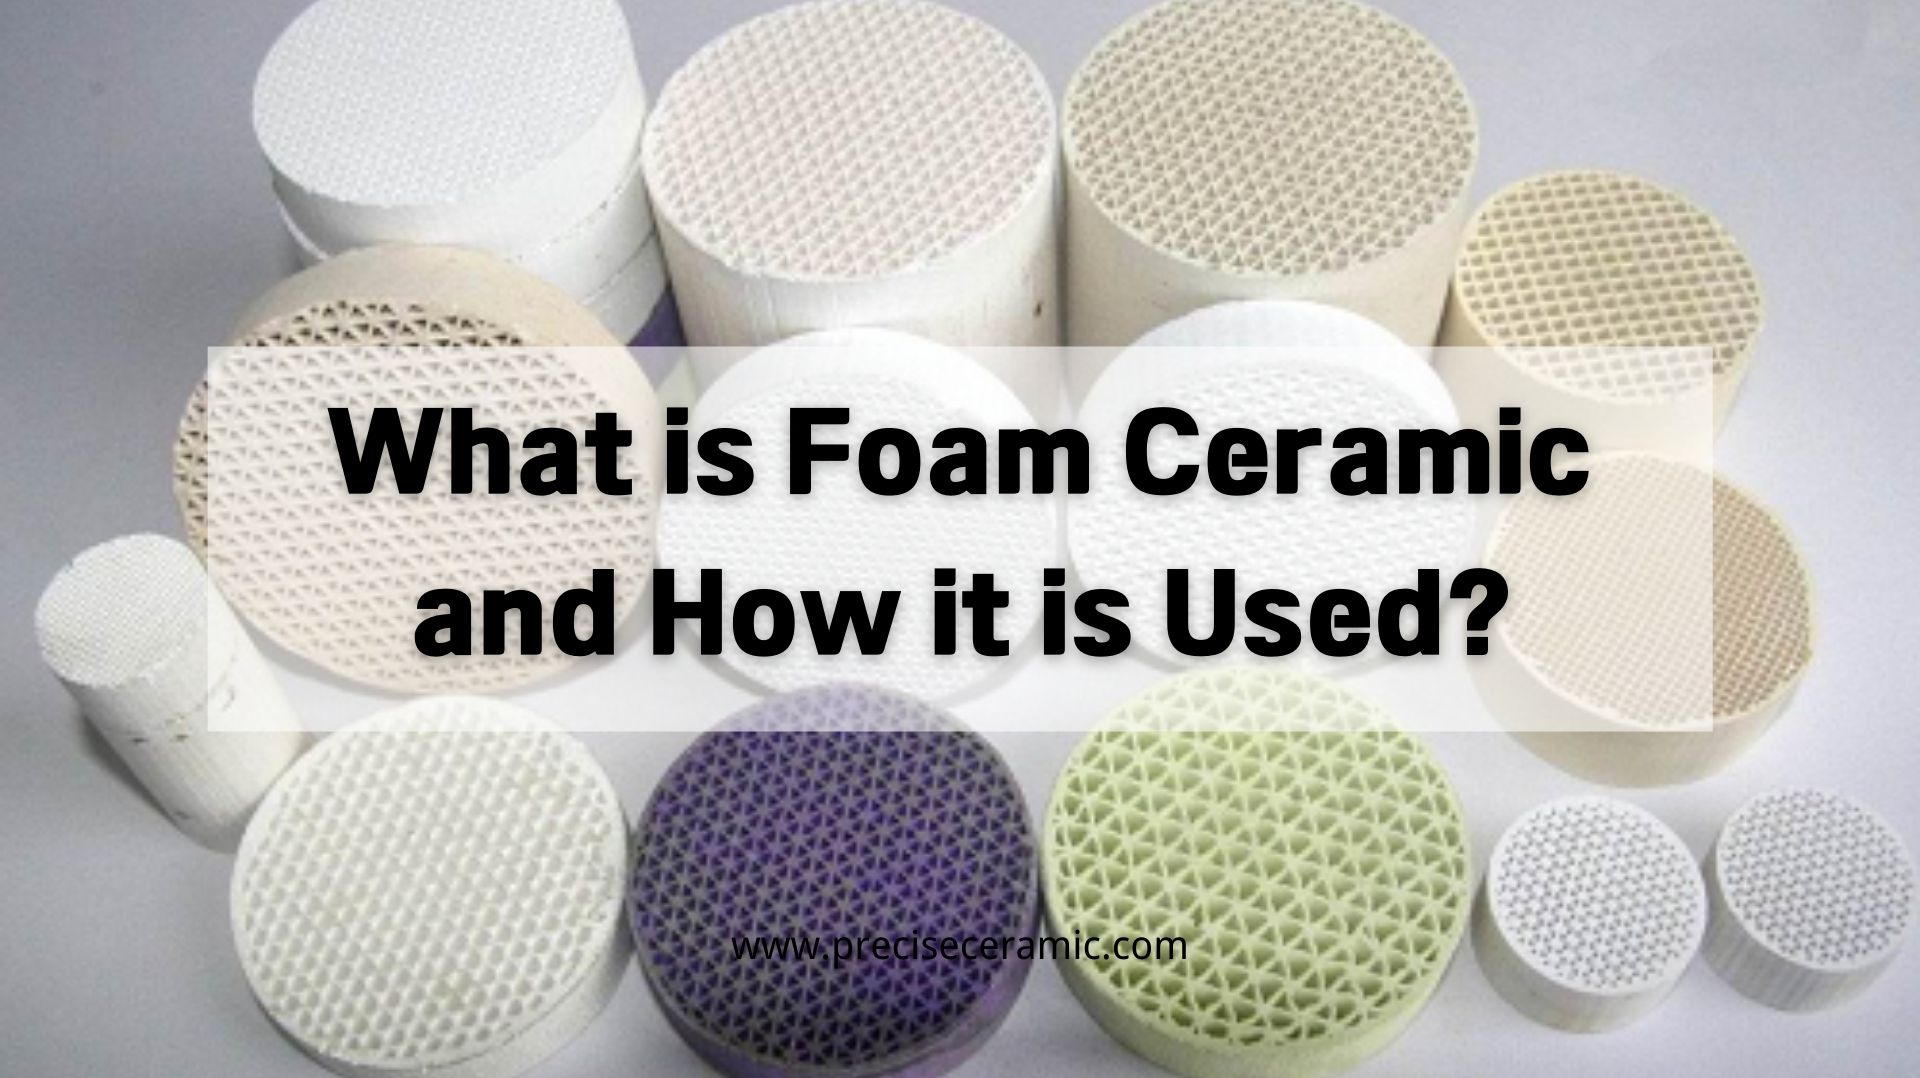 What is Foam Ceramic and How it is Used